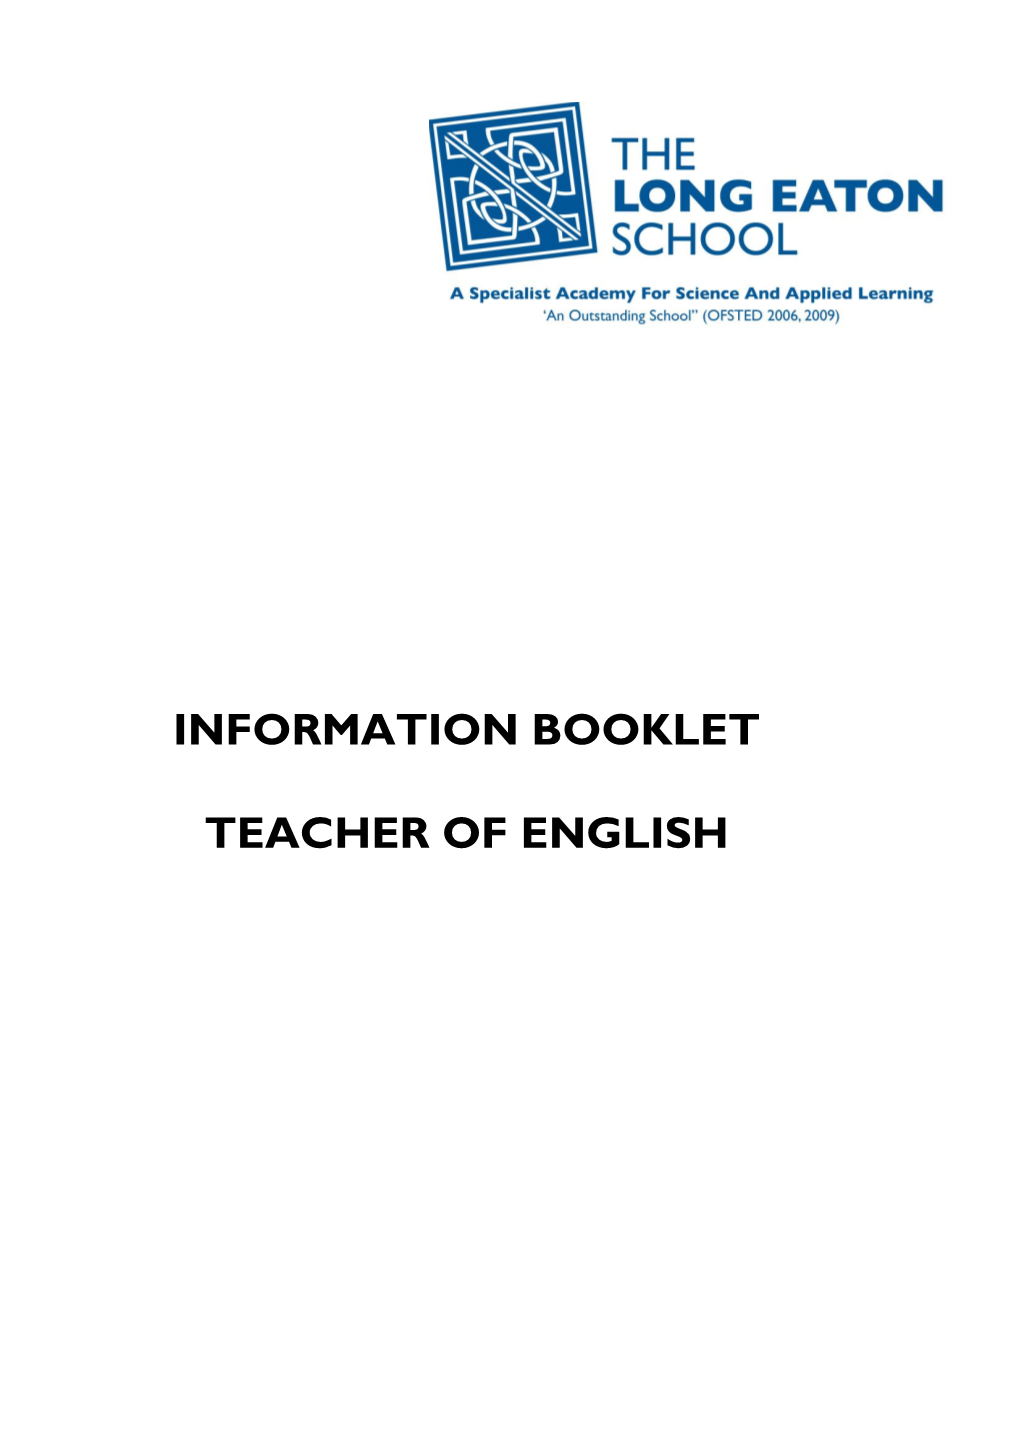 Information Booklet Teacher of English